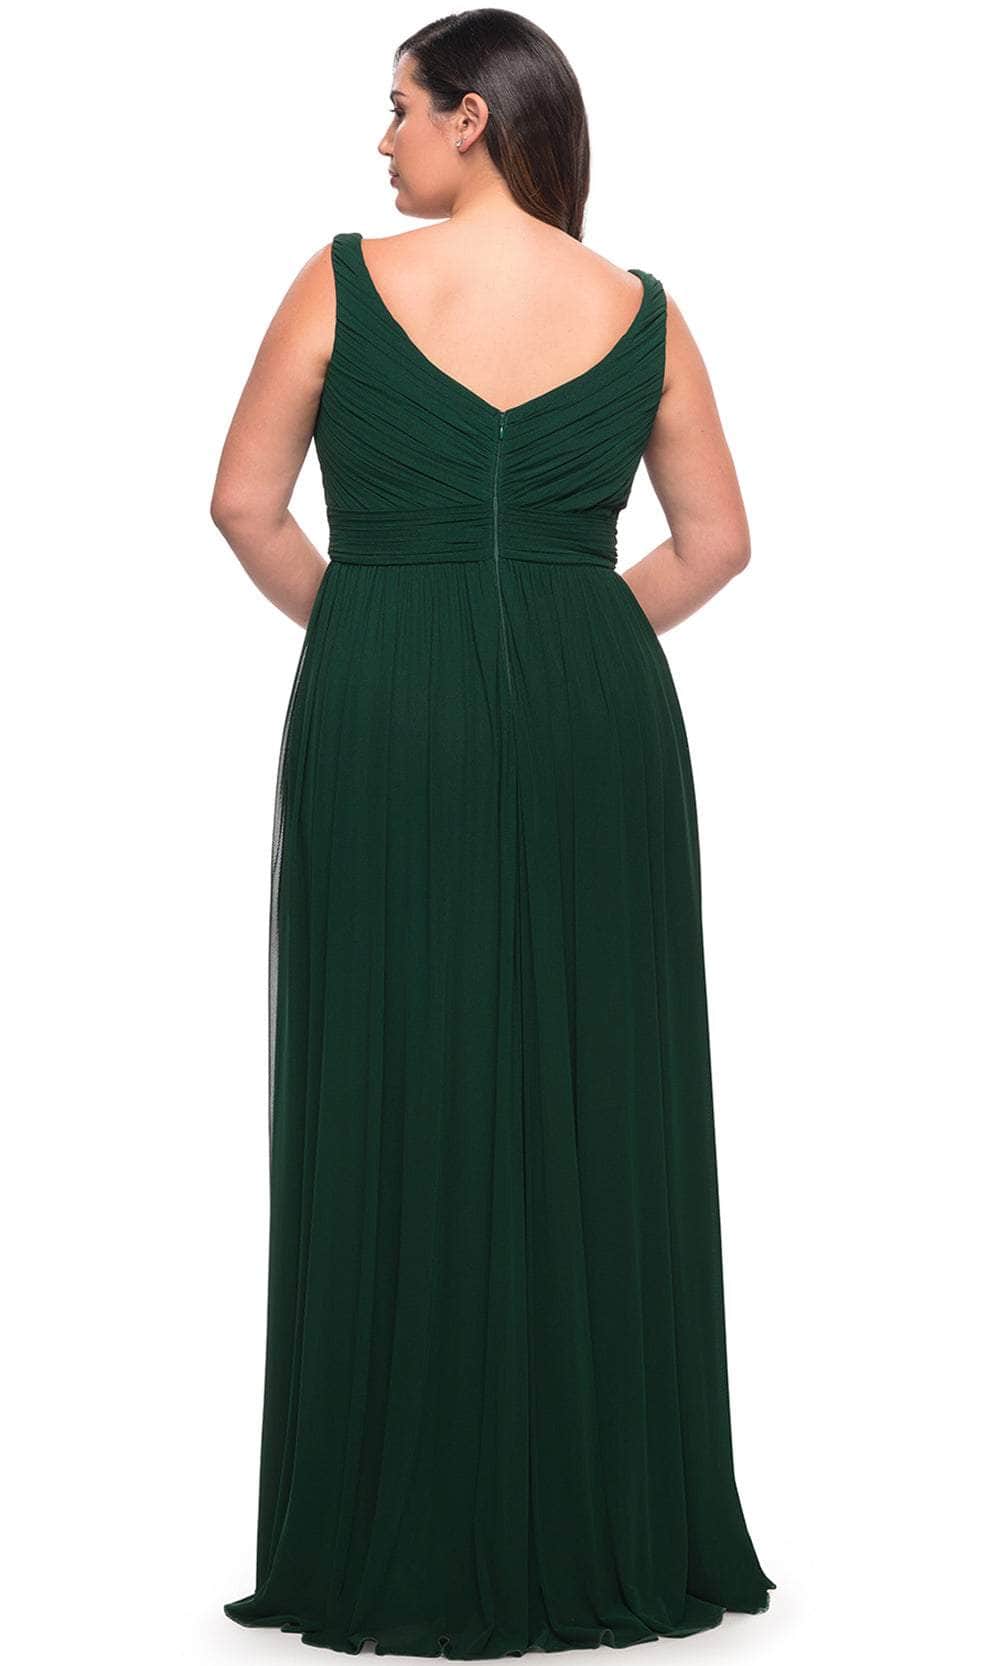 La Femme 29075 - Ruched Sleeveless Prom Gown Special Occasion Dress